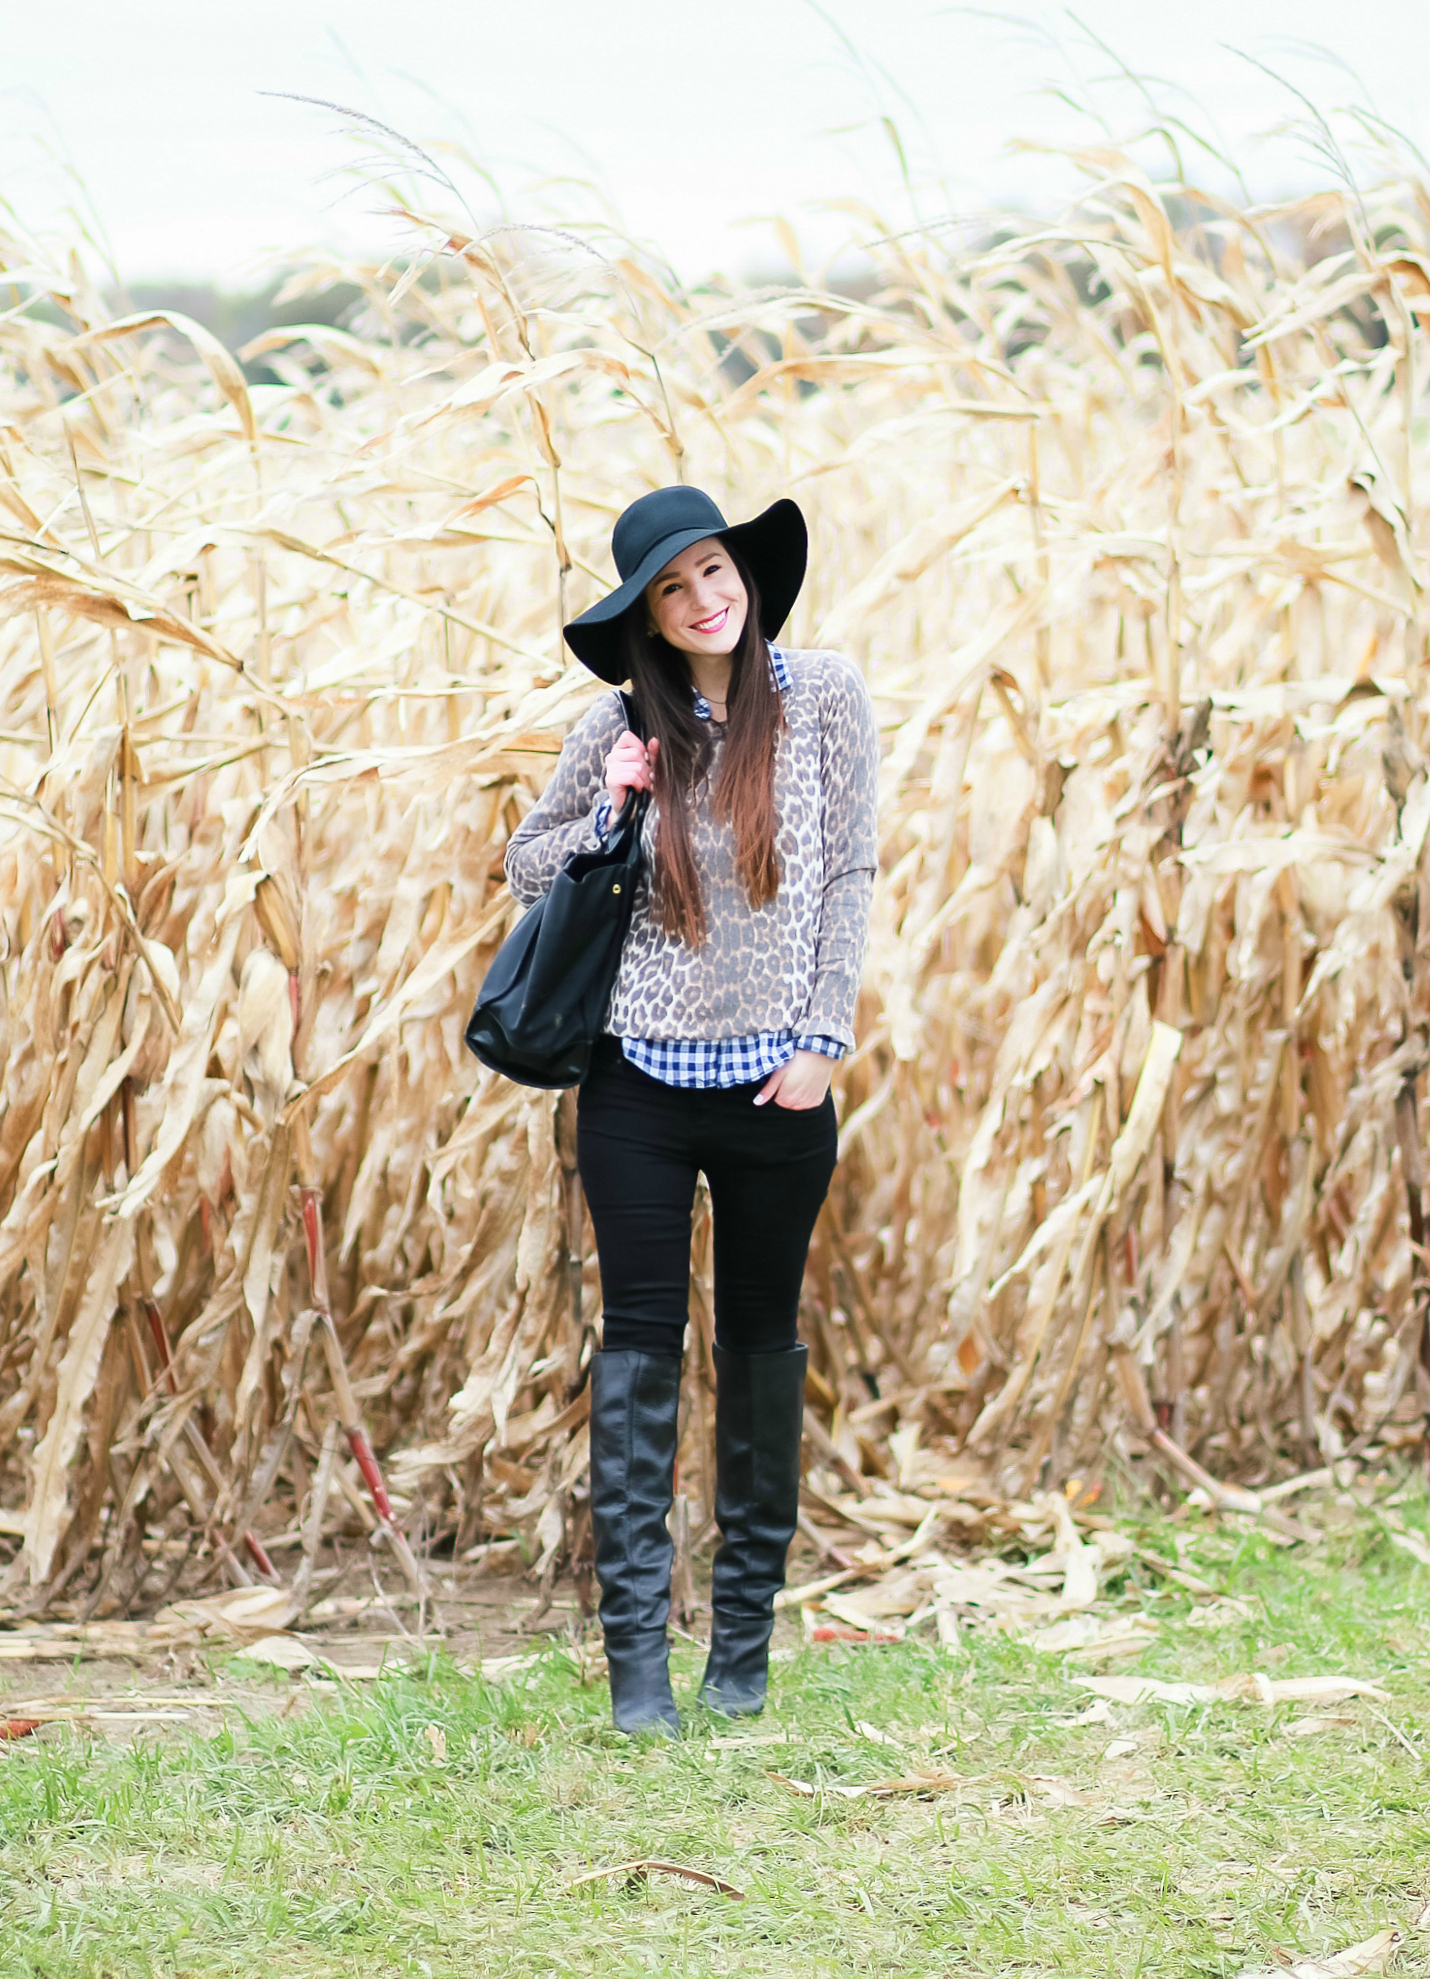 Black floppy hat with leopard crewneck sweater, J.Crew Factory blue gingham button down, black jeans, Nine West tall black boots, and a Tory Burch Ella tote | Comfy and casual fall outfit idea | Floppy hat outfit idea | How to wear a floppy hat in the fall by fashion blogger Stephanie Ziajka from Diary of a Debutante